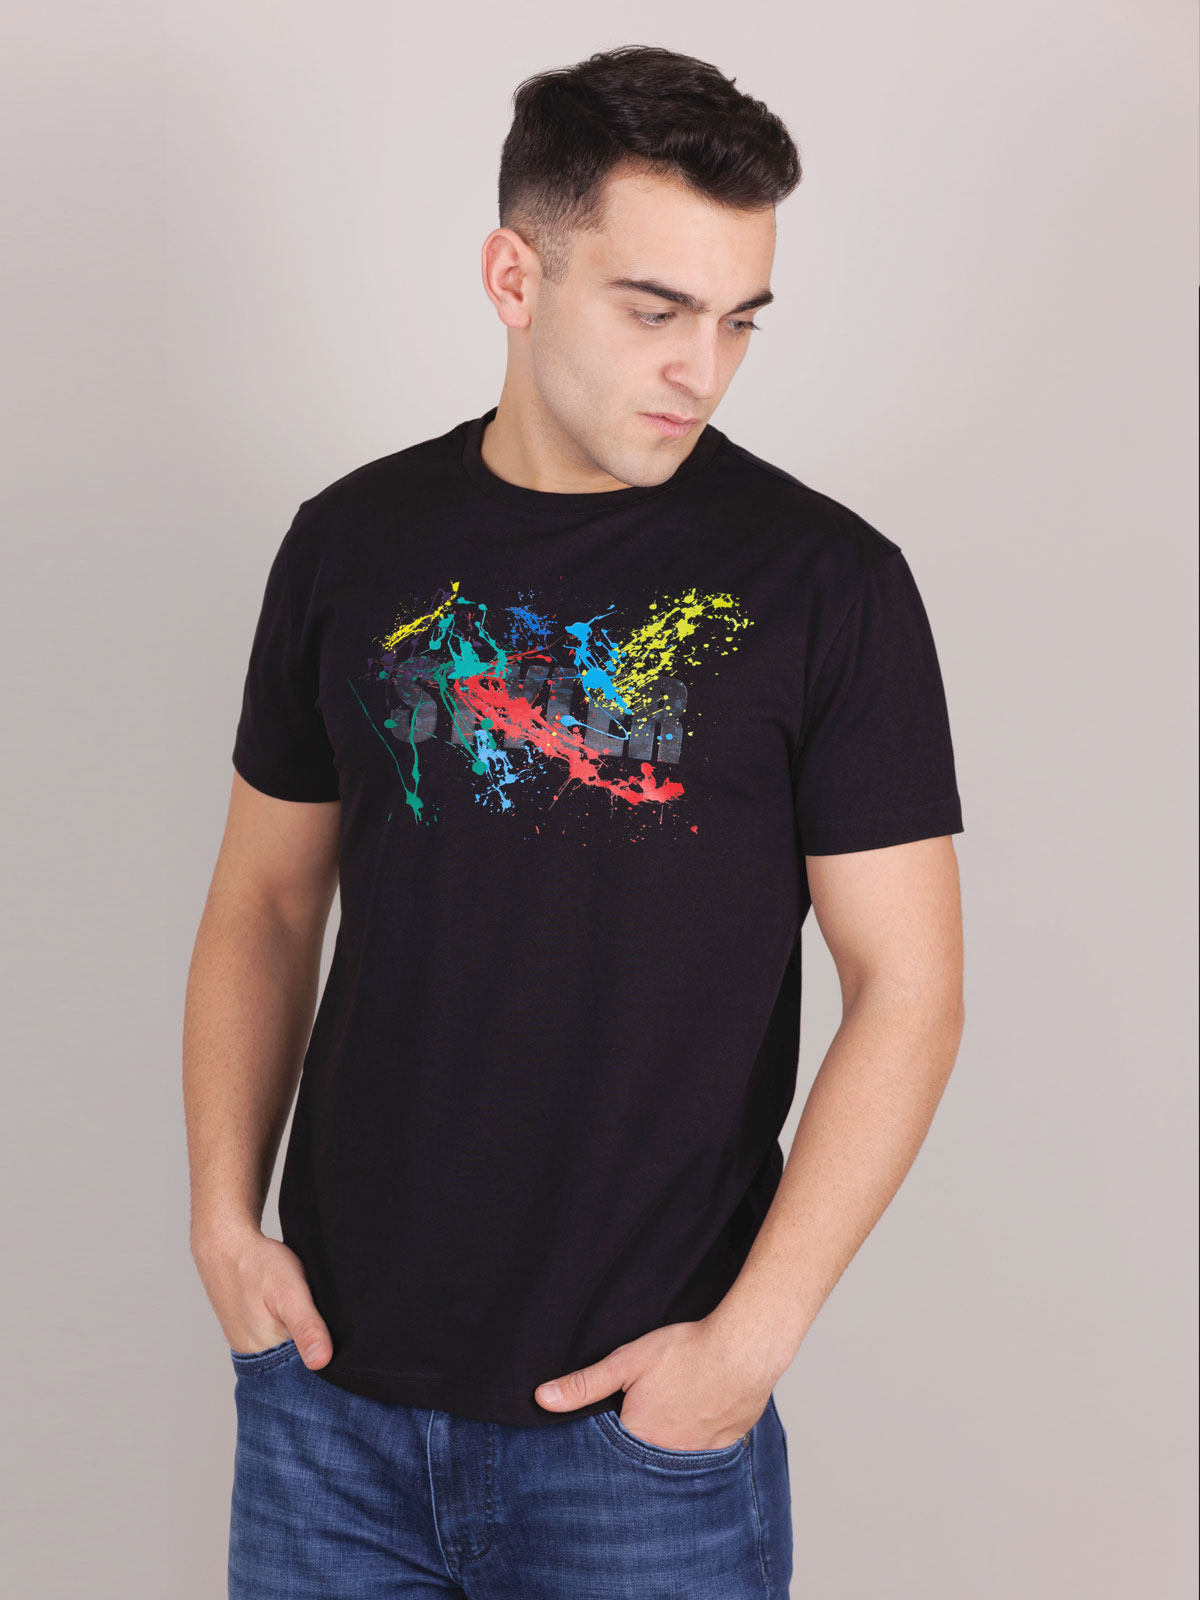 Tshirt in black with a spectacular prin - 96459 € 23.62 img4